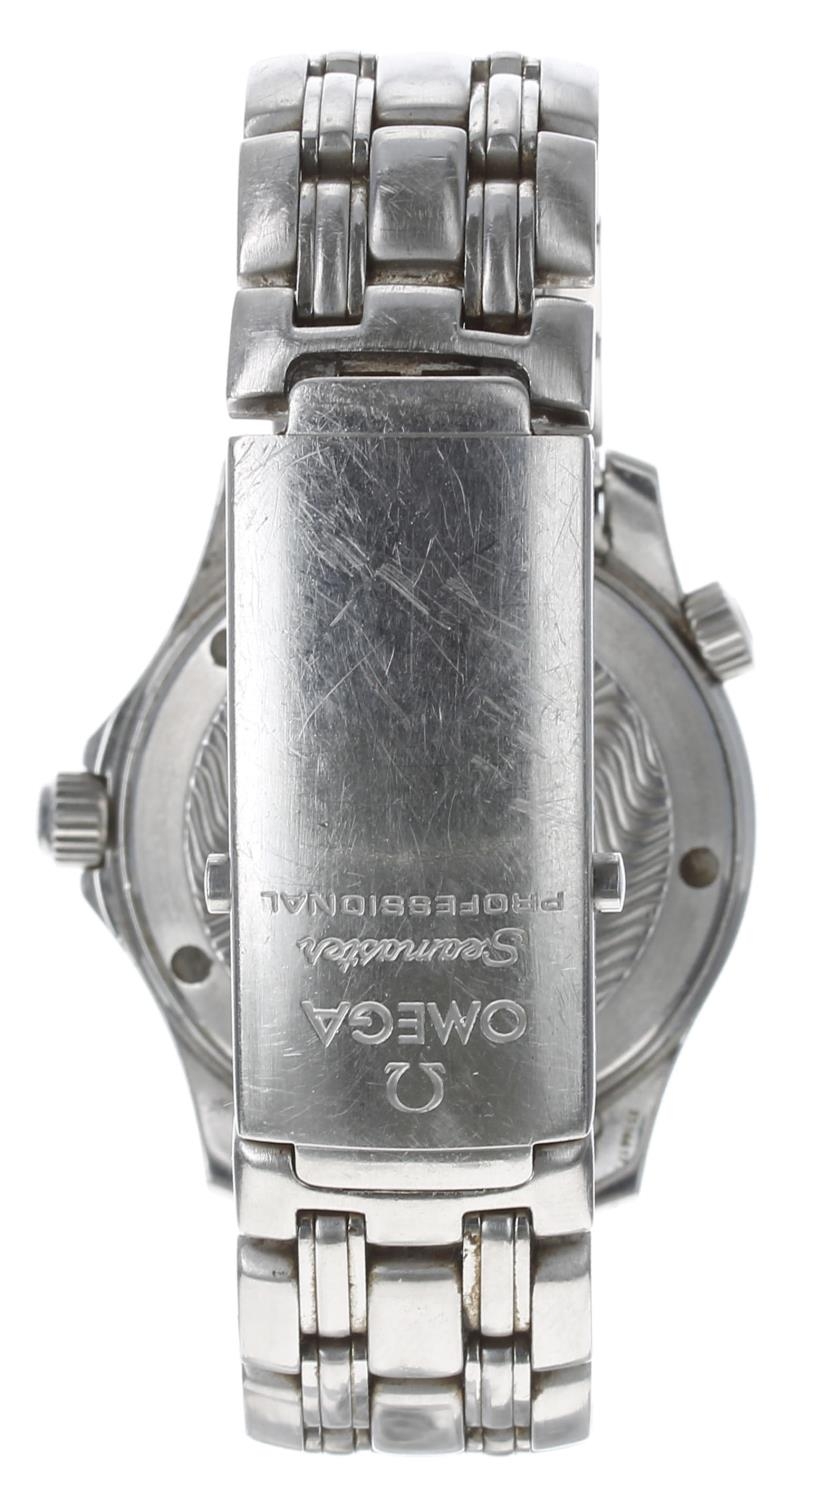 Omega Seamaster Professional 300m/1000ft stainless steel gentleman's wristwatch, reference no. 196. - Image 4 of 5